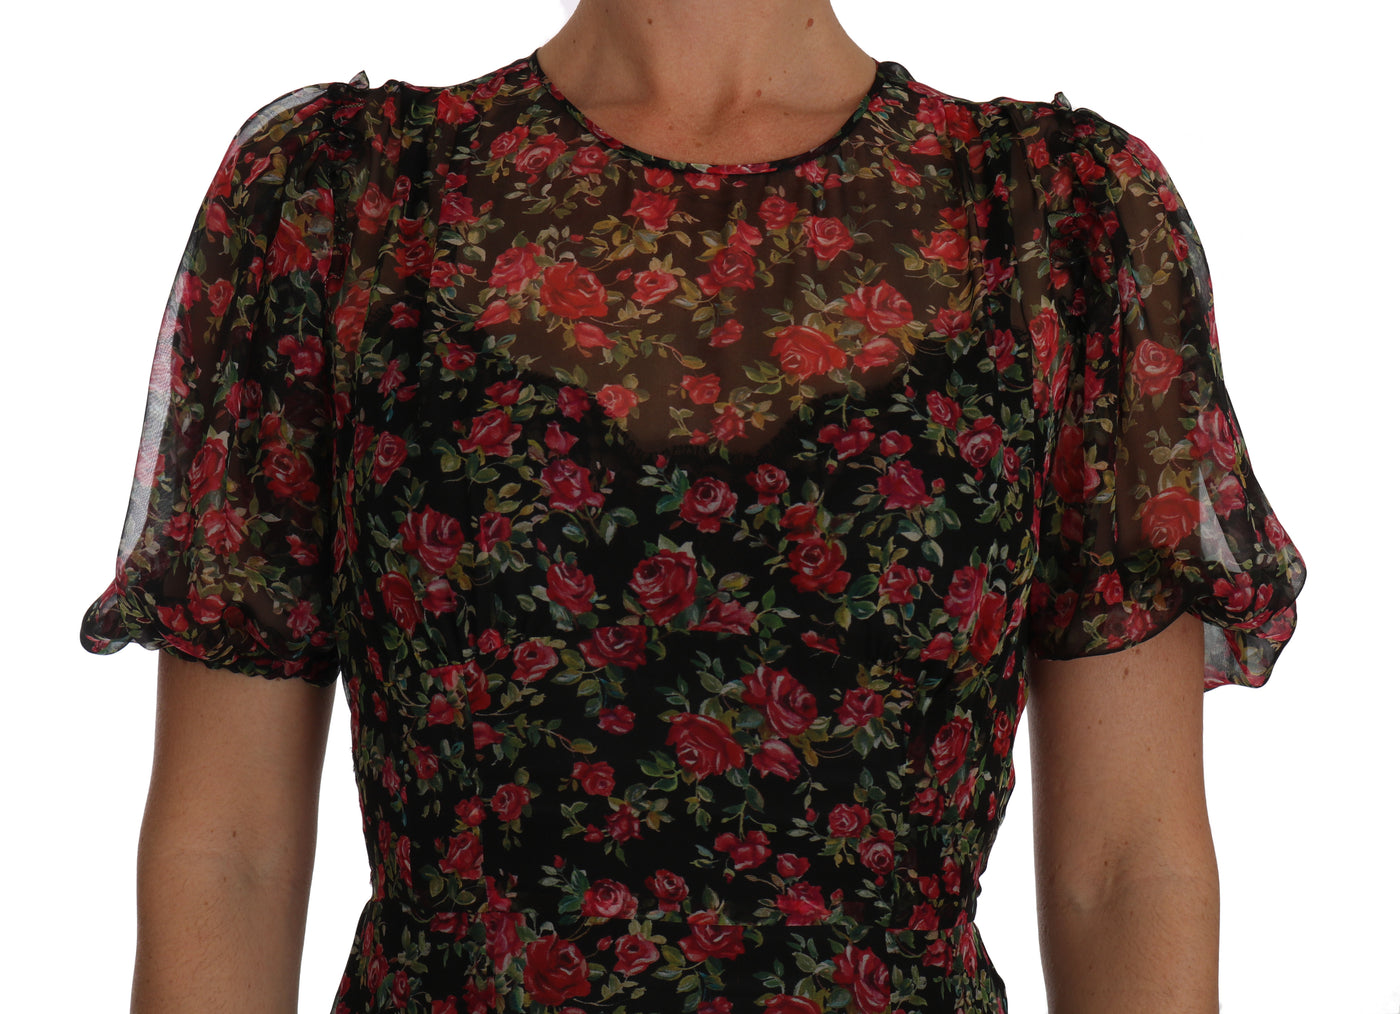 Dolce & Gabbana Black Floral Roses A-Line Shift Gown